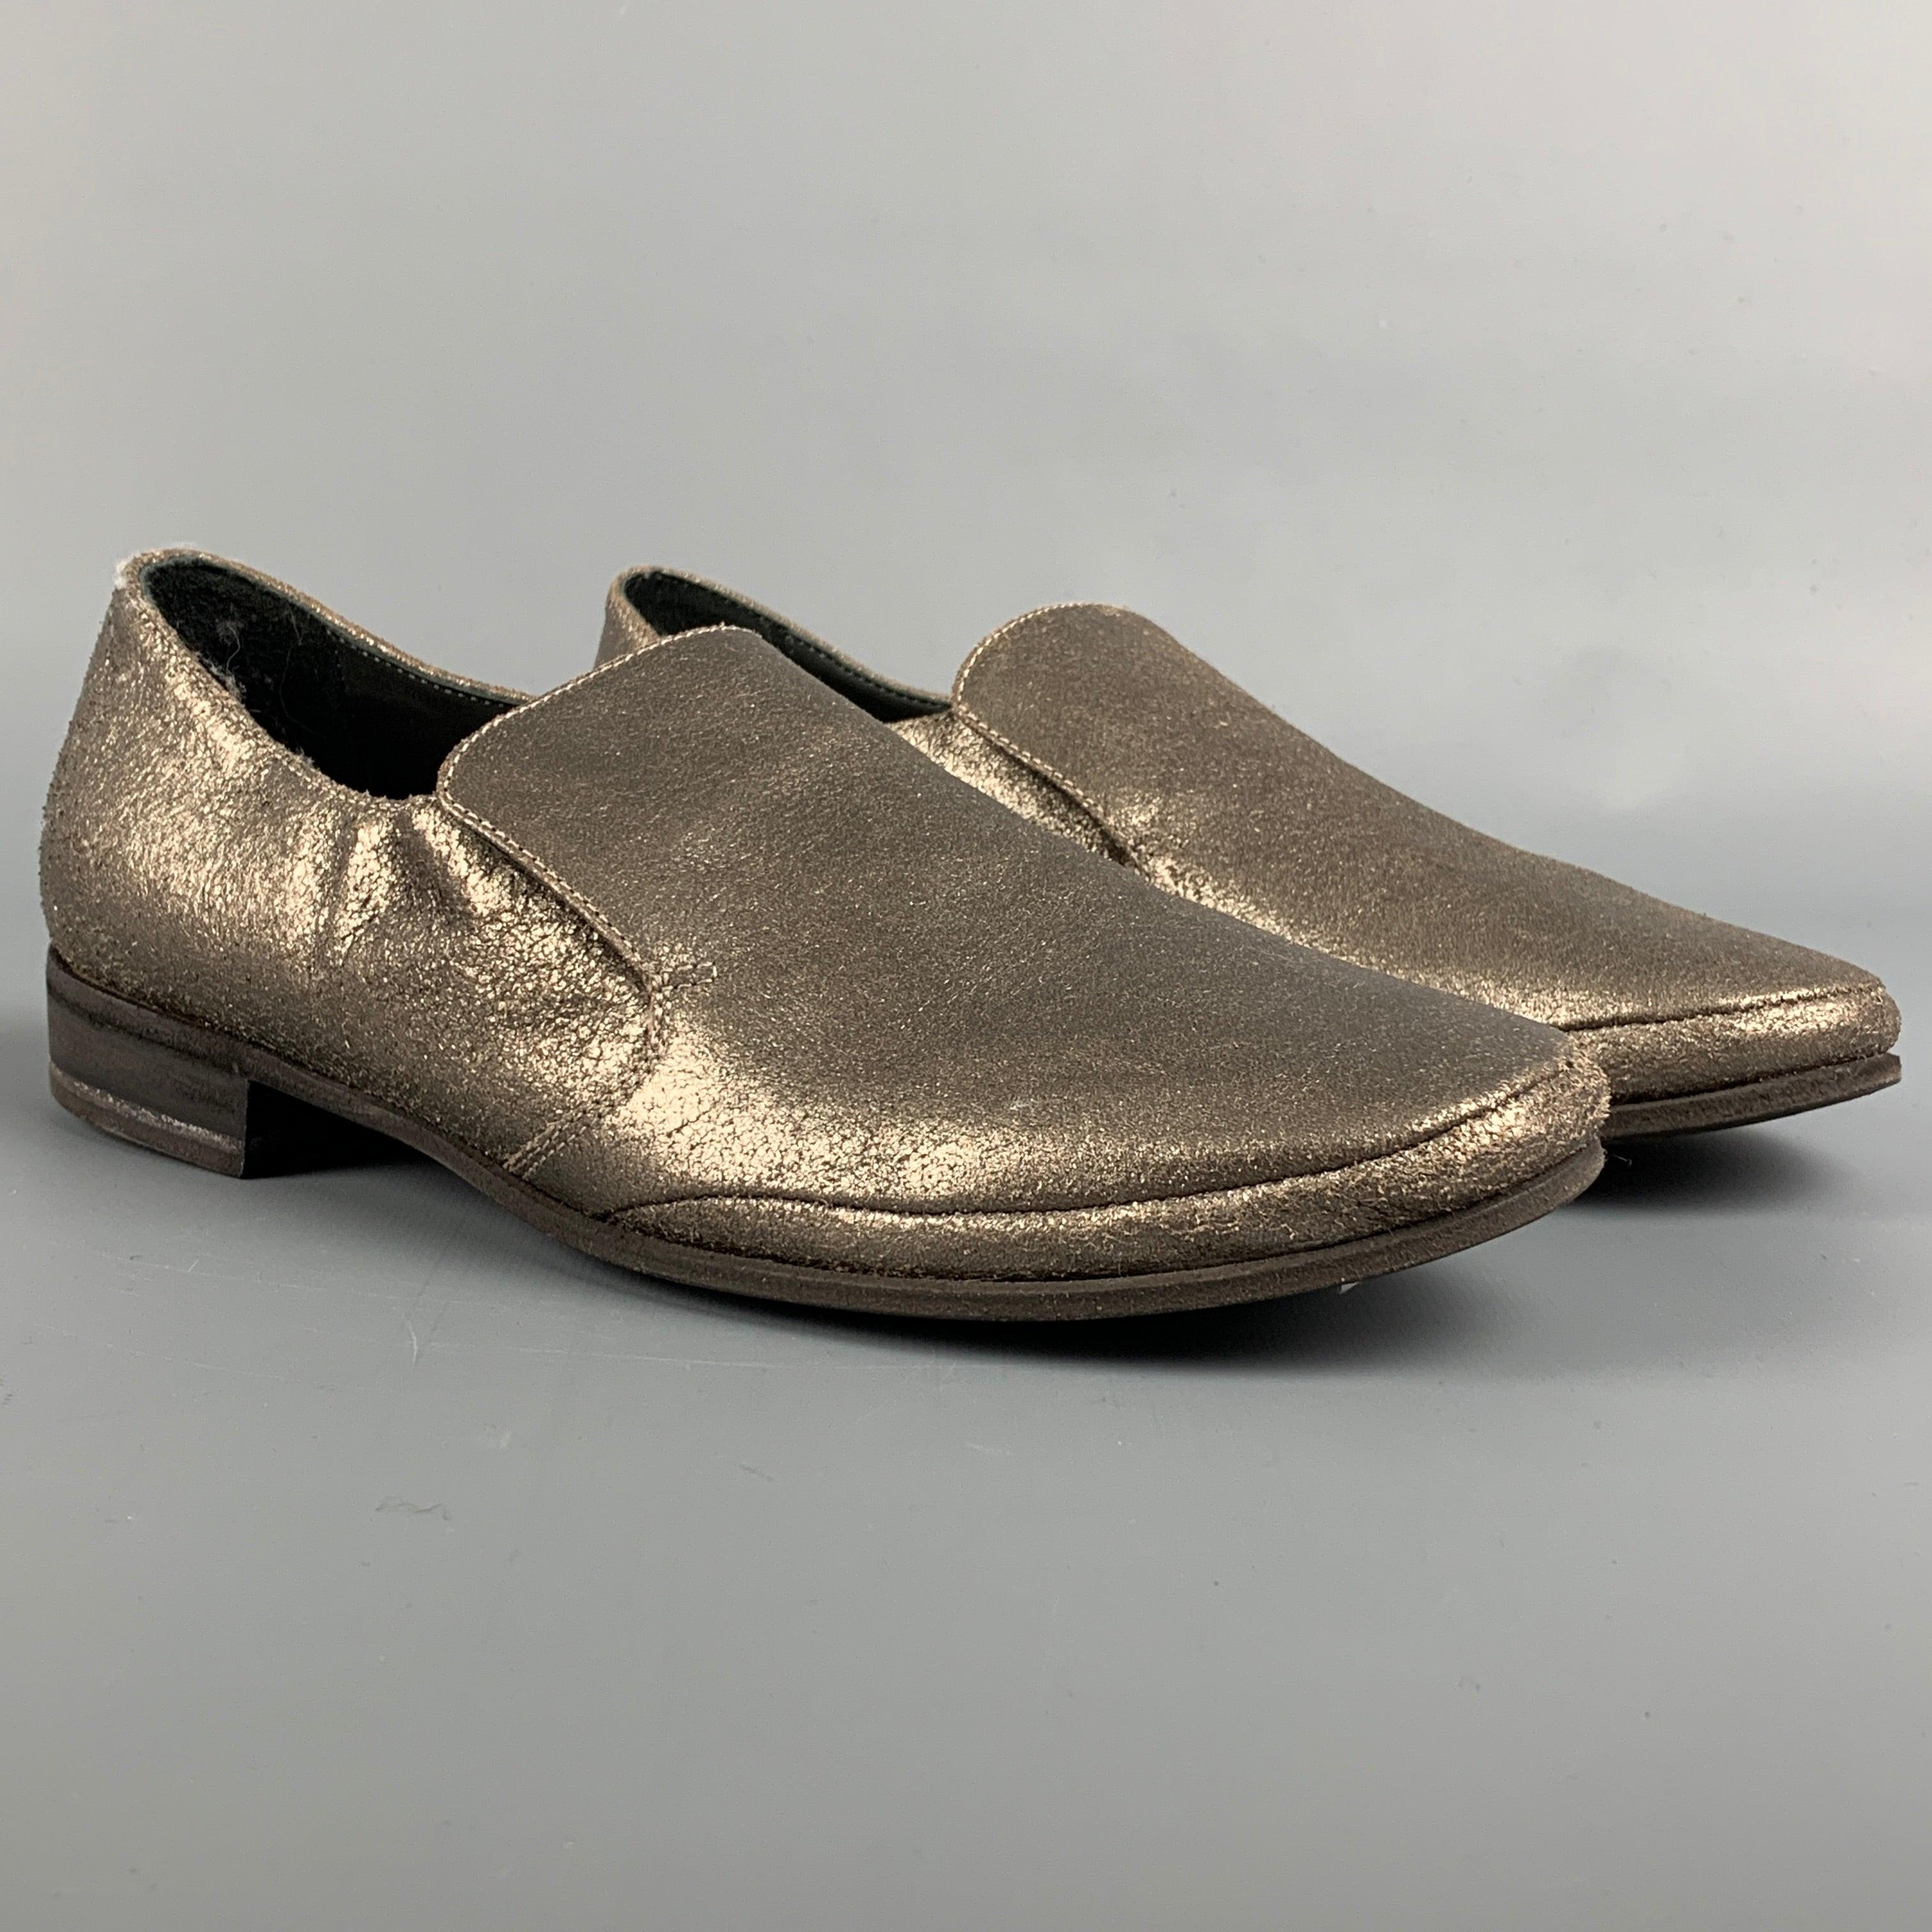 BRUNELLO CUCINELLI flats comes in a silver crackled leather featuring a slip on style and a short chunky heel. Includes dustbag. Made in Italy.
Very Good Pre-Owned Condition. 

Marked:   37Outsole: 10 inches  x 3 inches  
  
  
 
Reference: